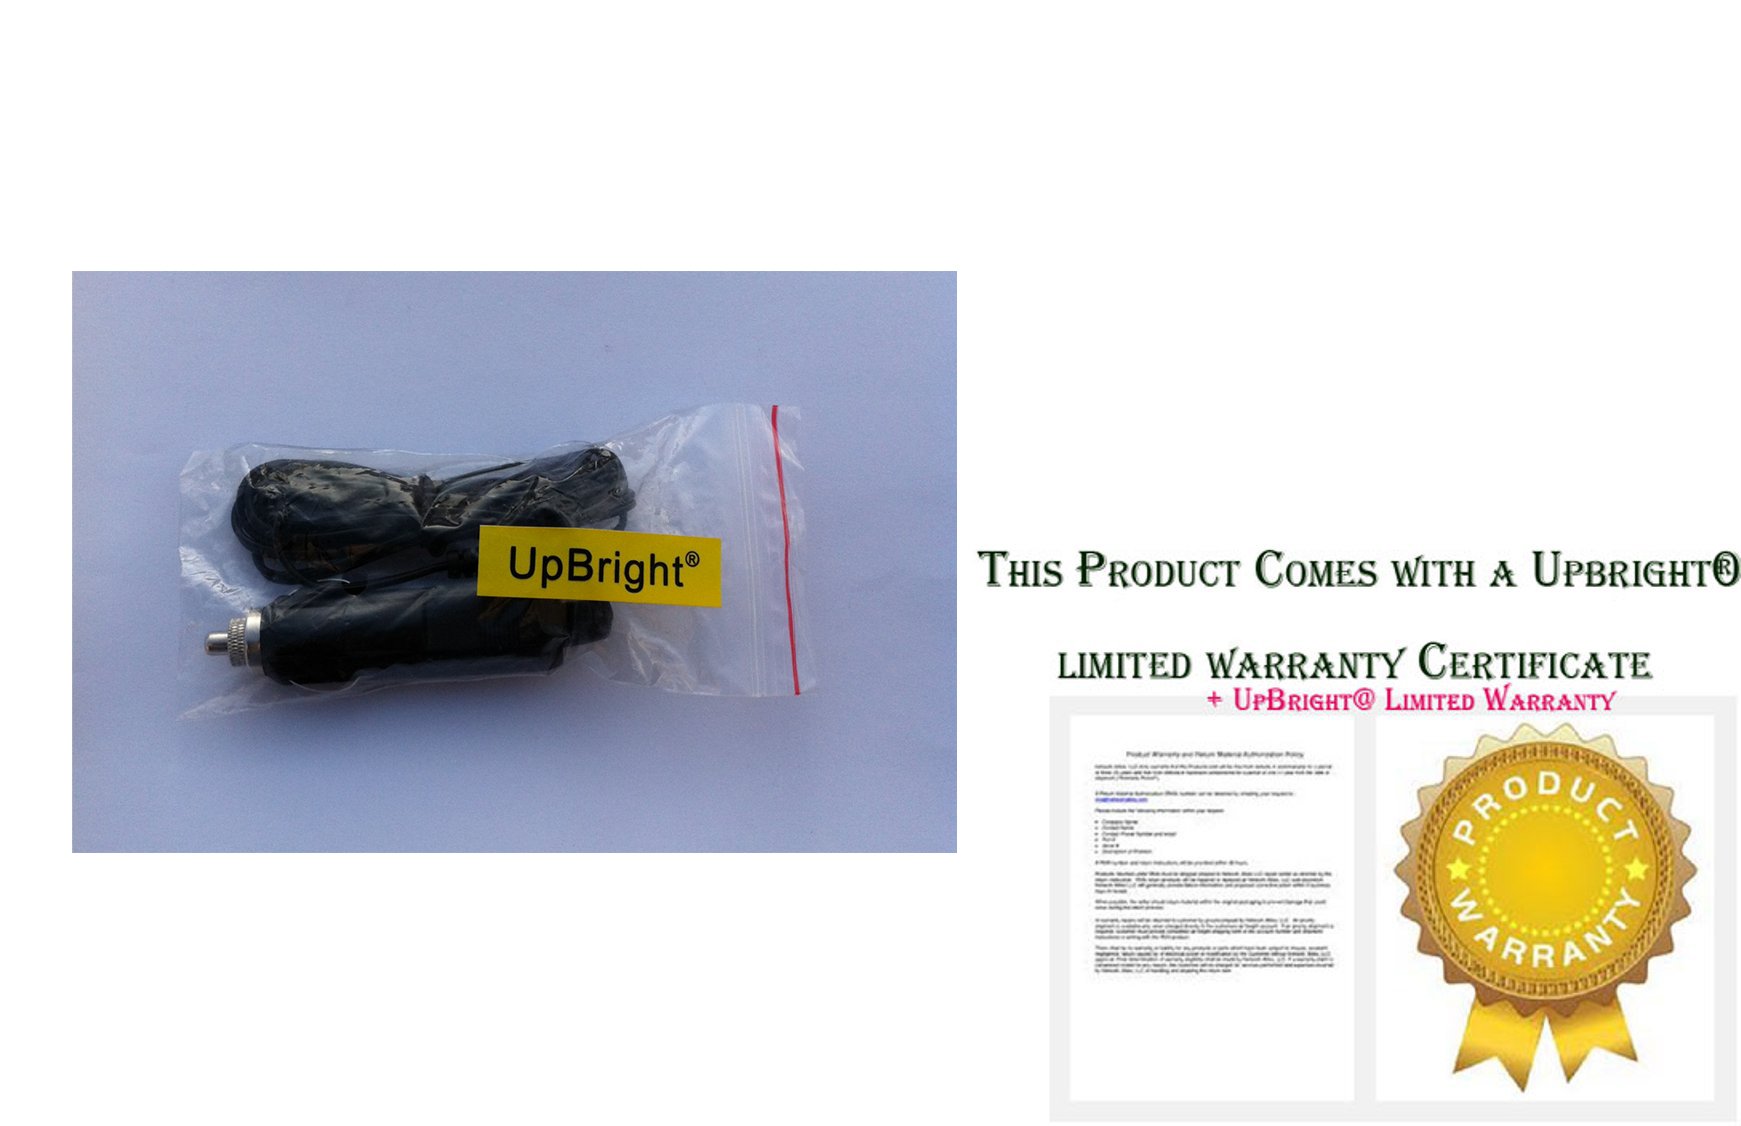 UpBright New Car DC Adapter Compatible with Disney DVD Player C7100DP P7100PD C7100PDE D7500PDP APX920A D7500PD D 7500 PDD D7000PD D7500PDD D7500PDD Auto Vehicle Boat RV Cigarette Lighter Power Supply